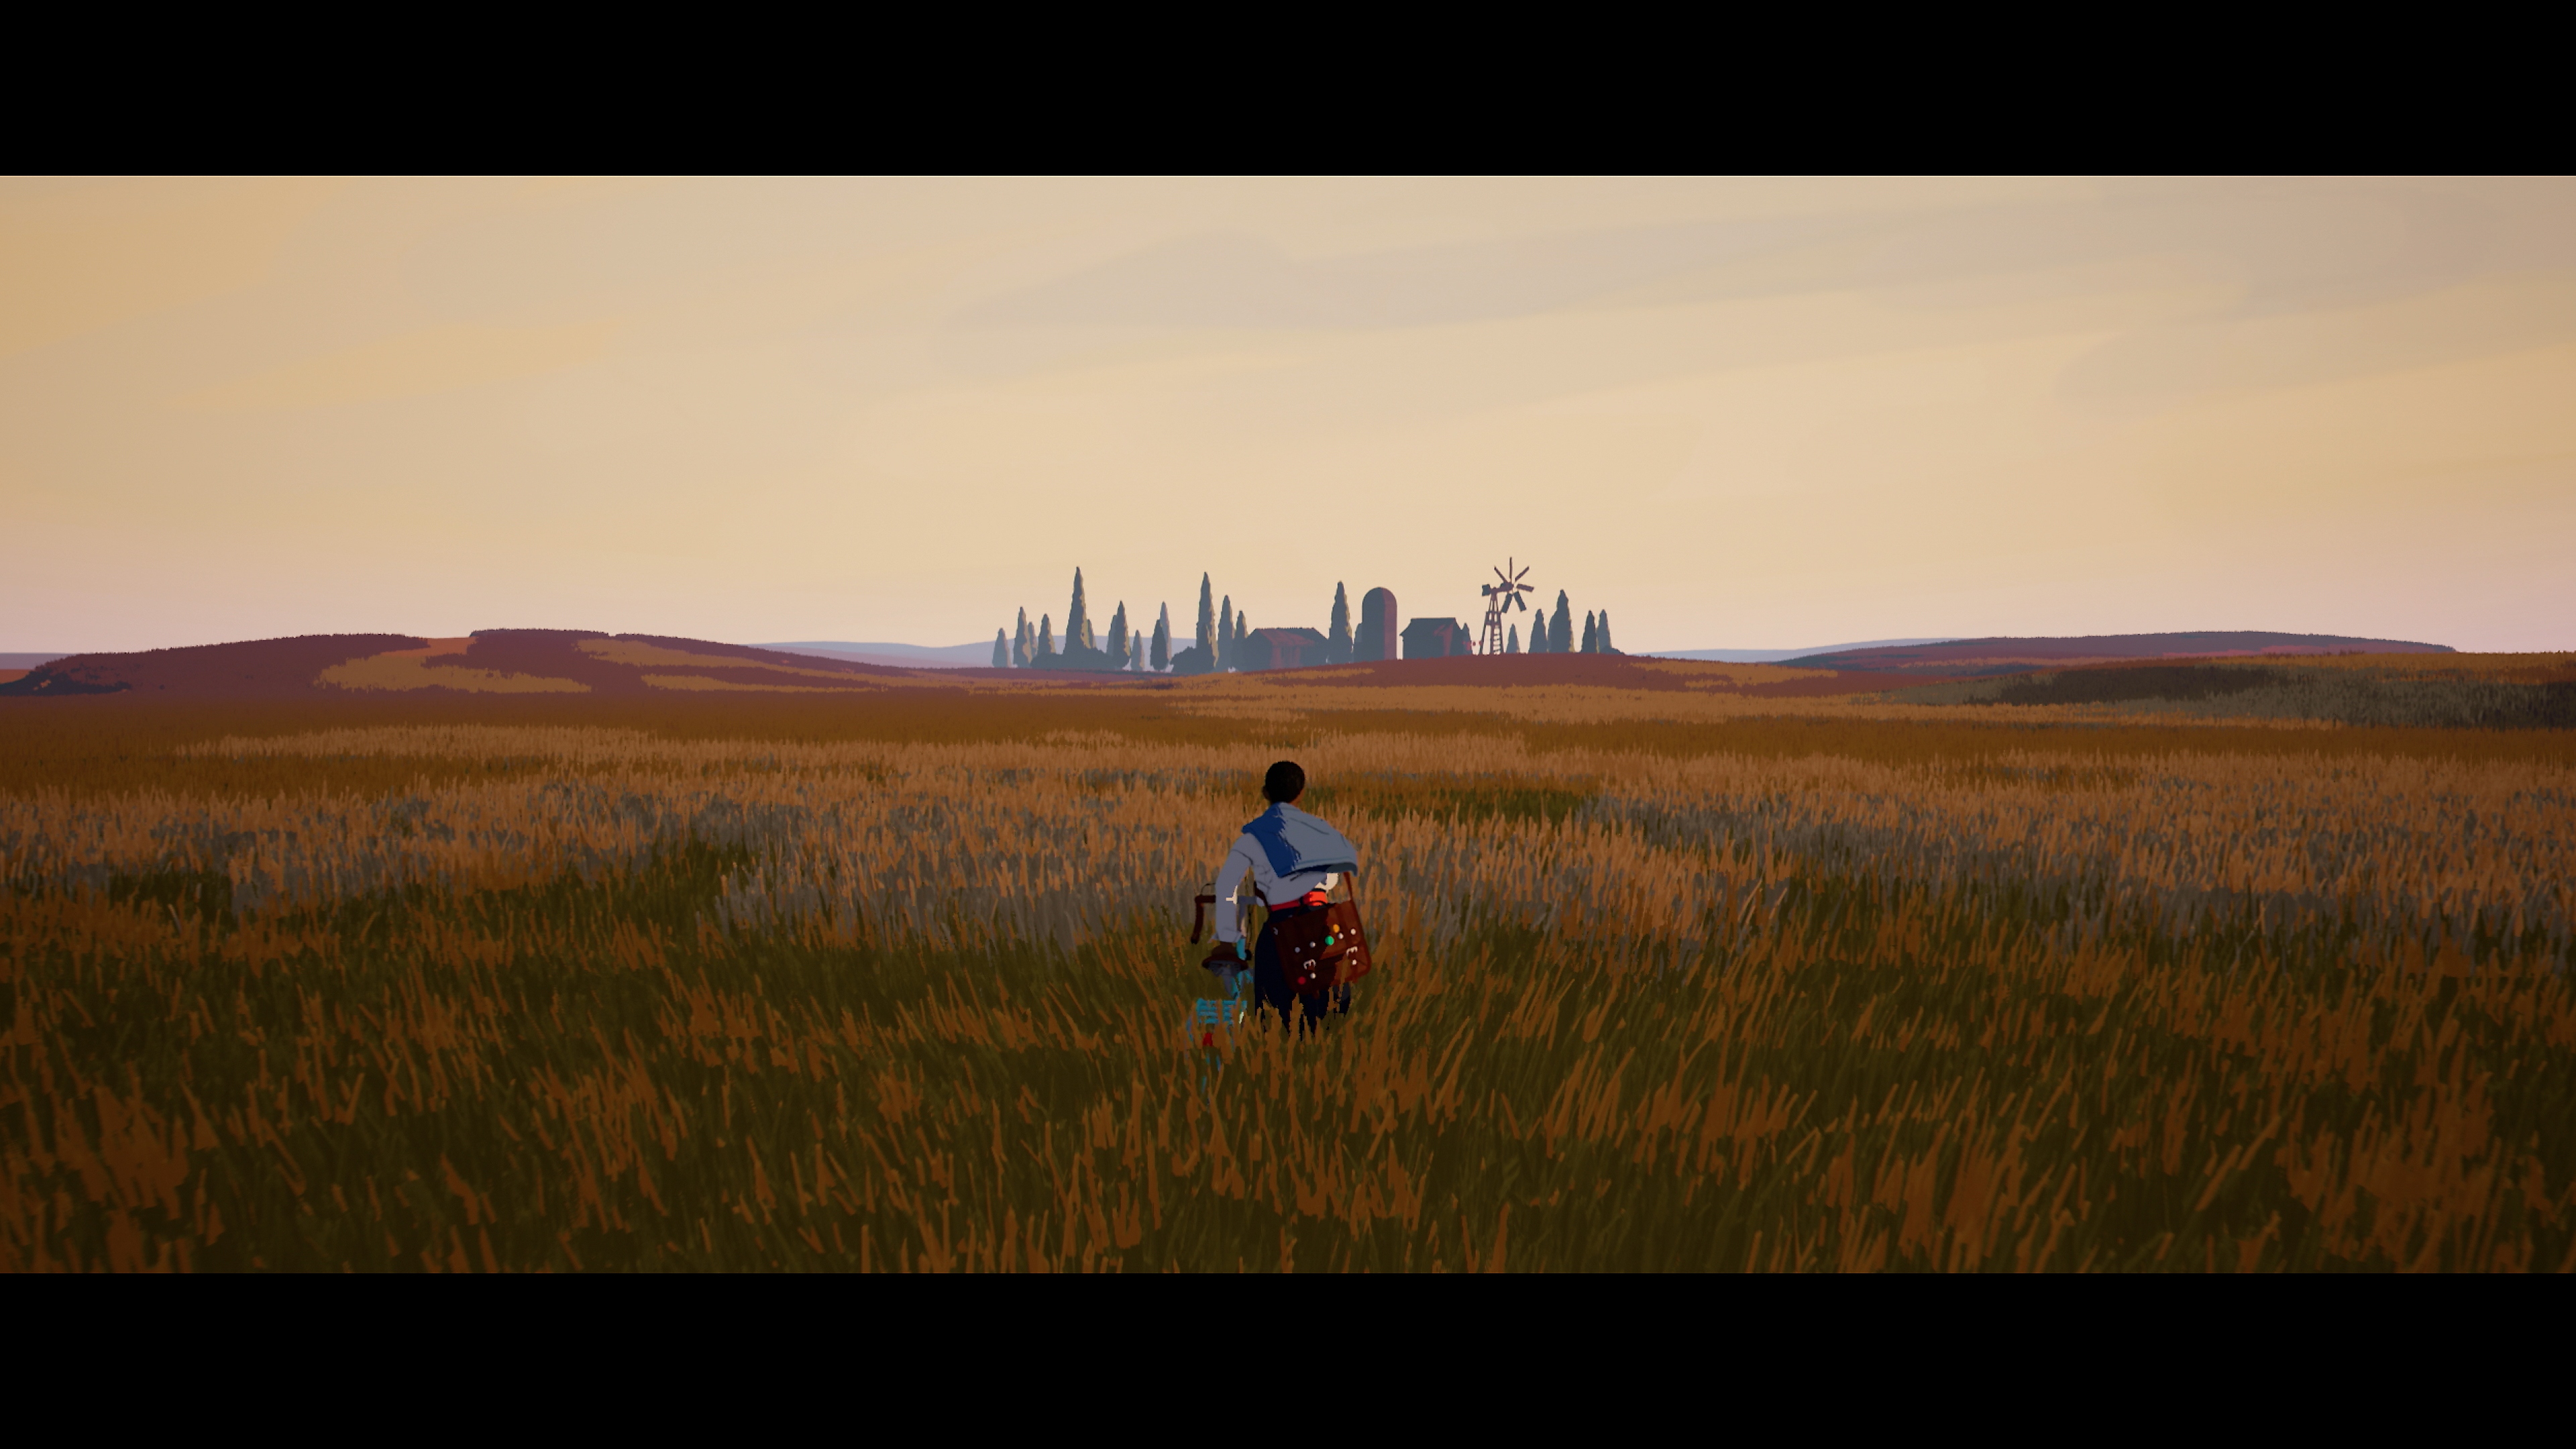 Season: A Letter to the Future screenshot showing the main character sitting in a field